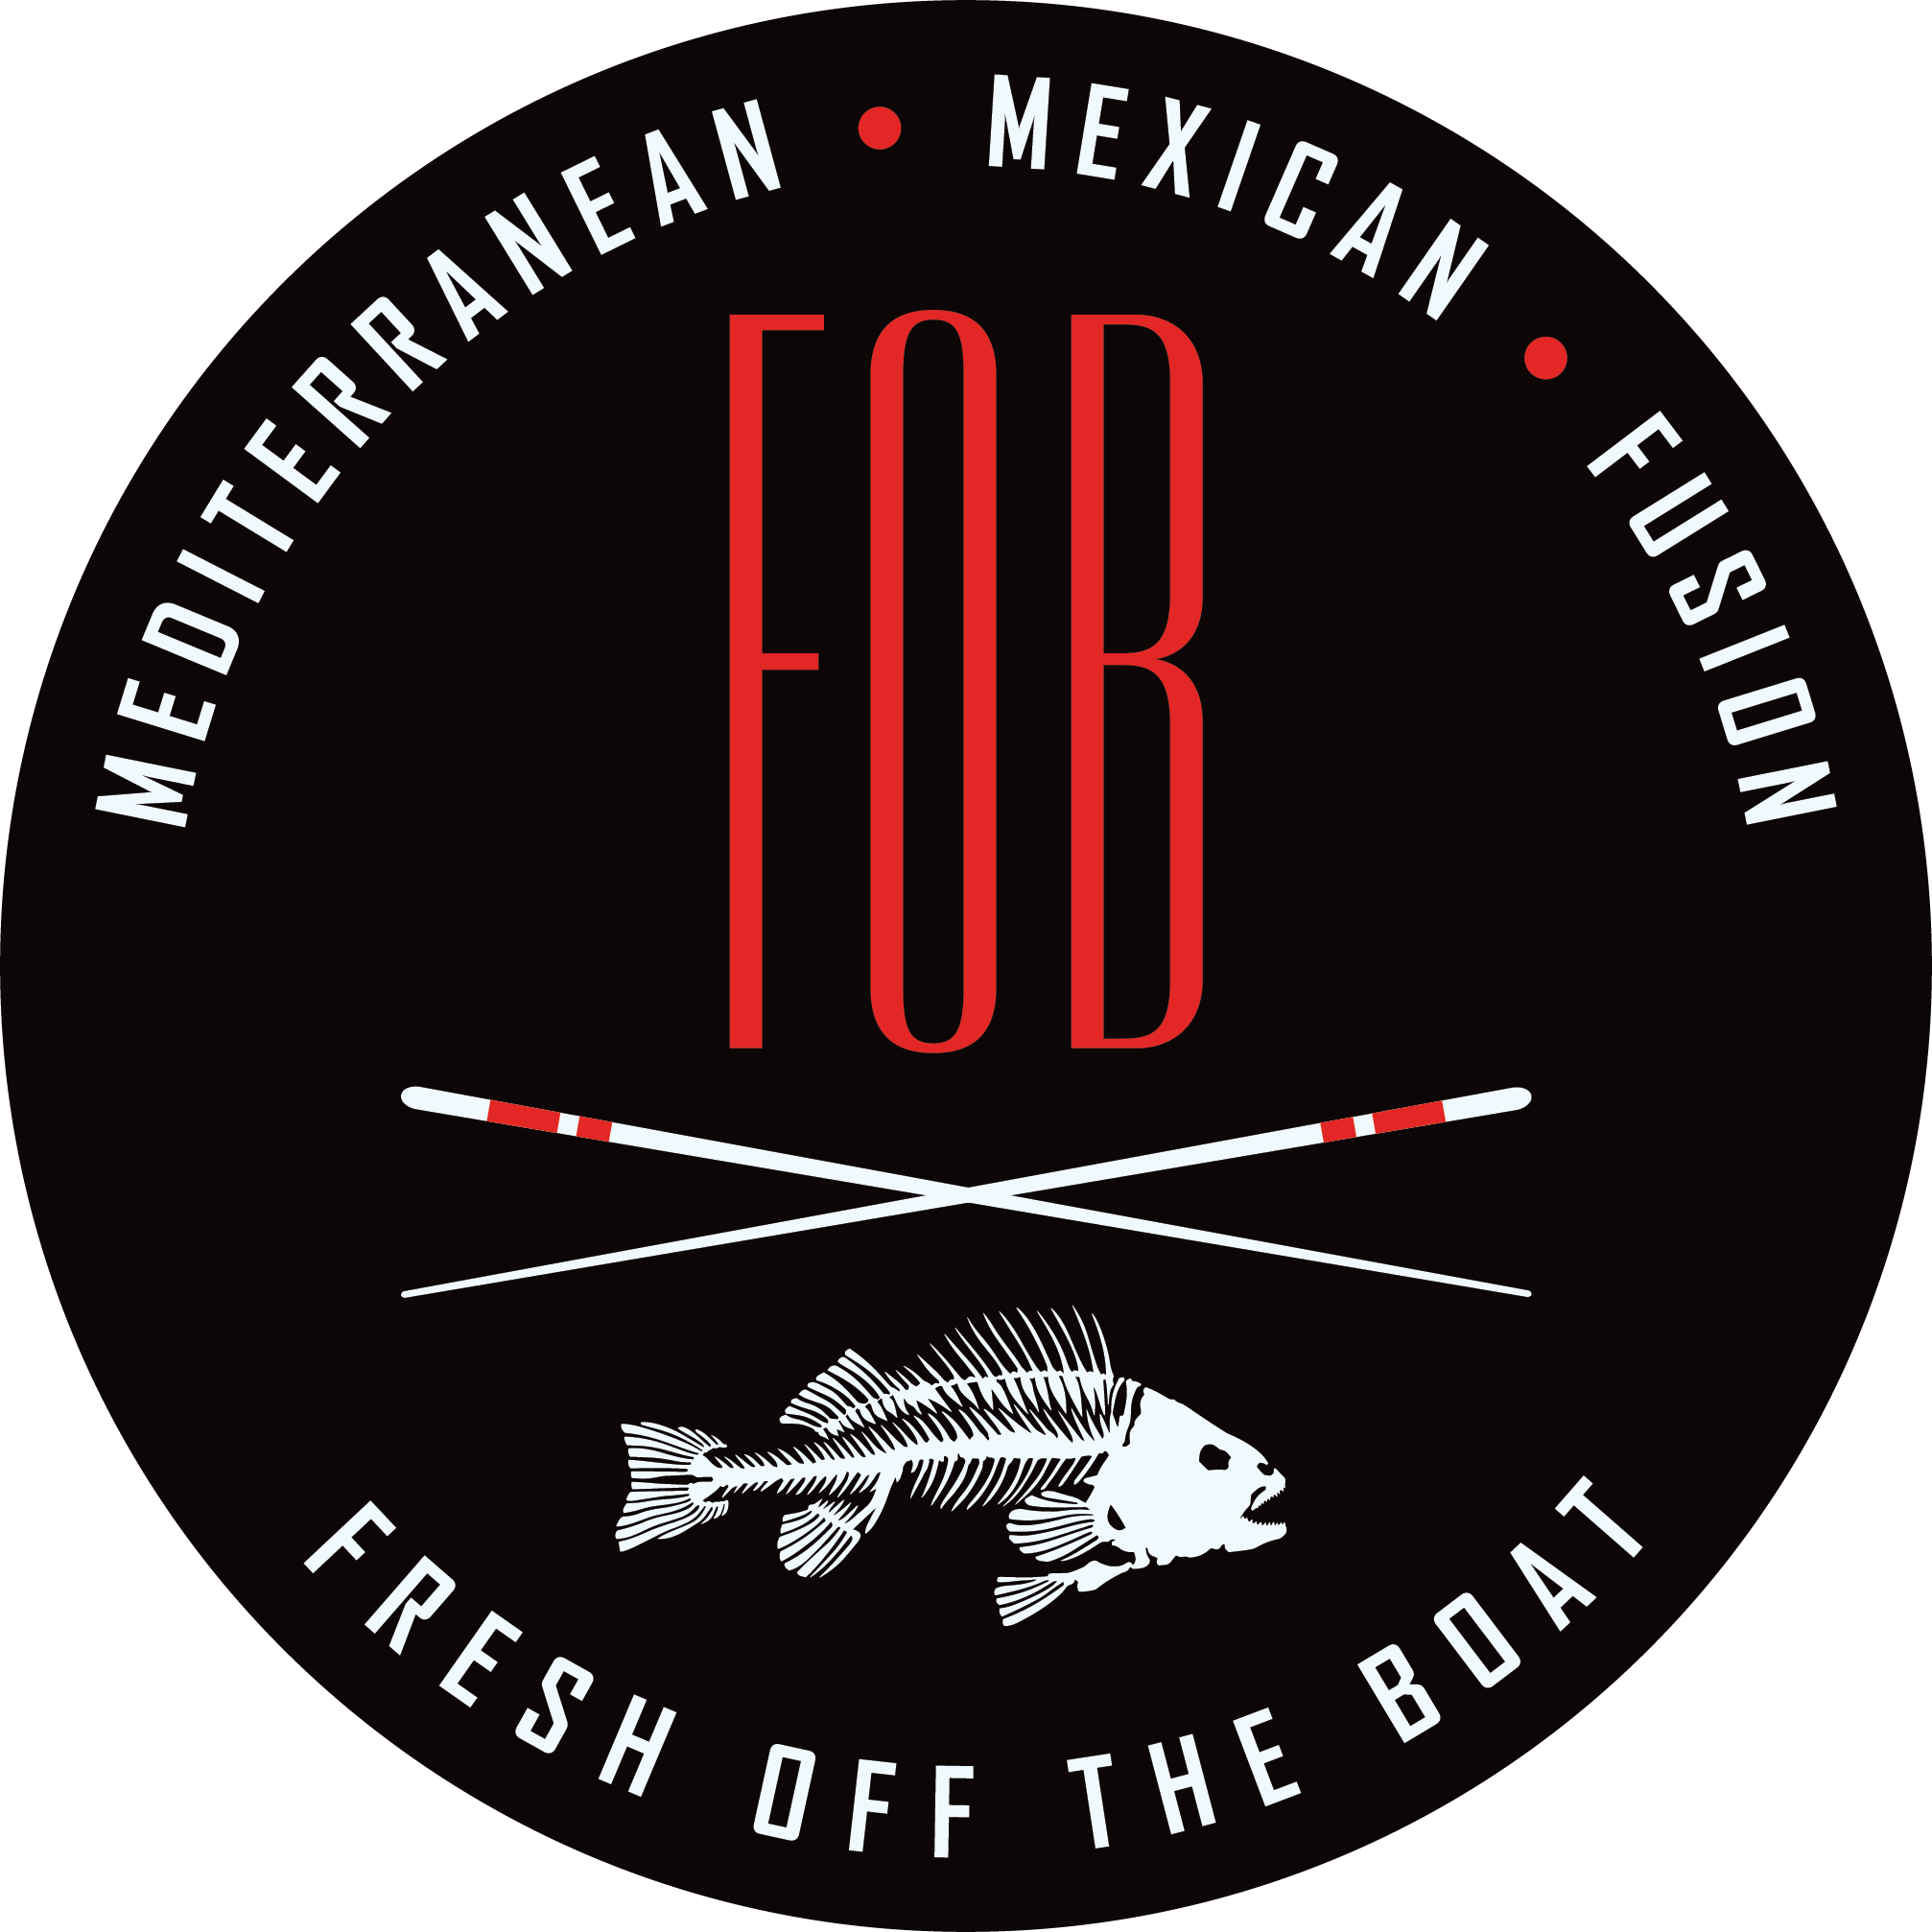 Off The Boat Fish Grill- Tustin 17582 17th Street, Suite 105